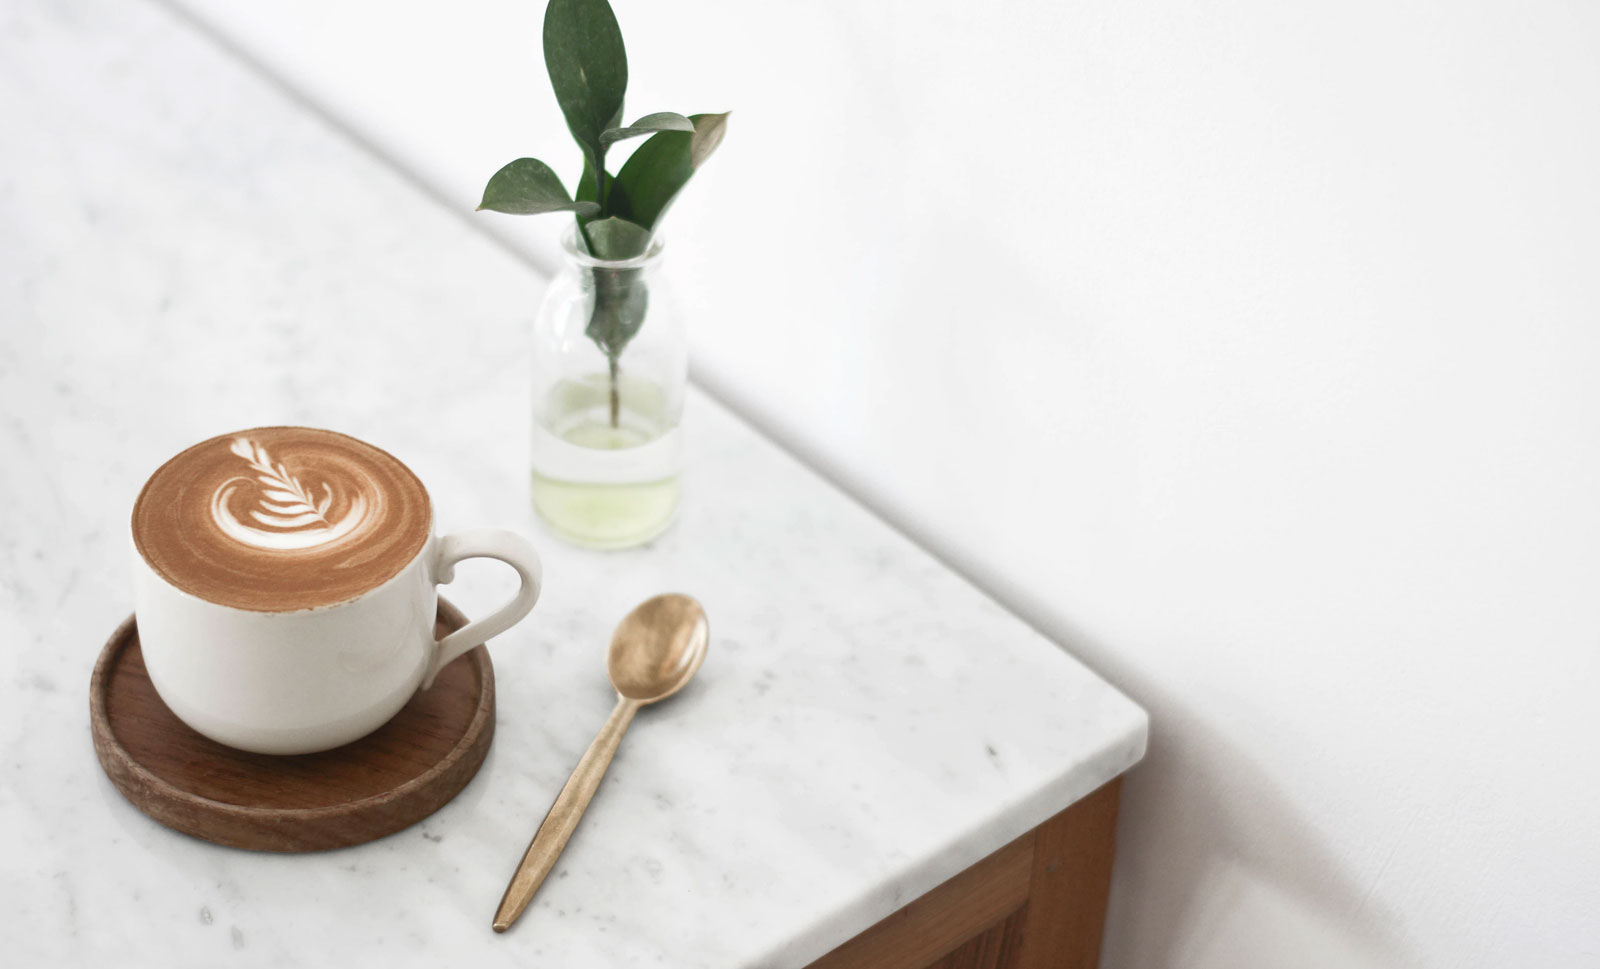 A coffee with latte art at a corner of a countertop